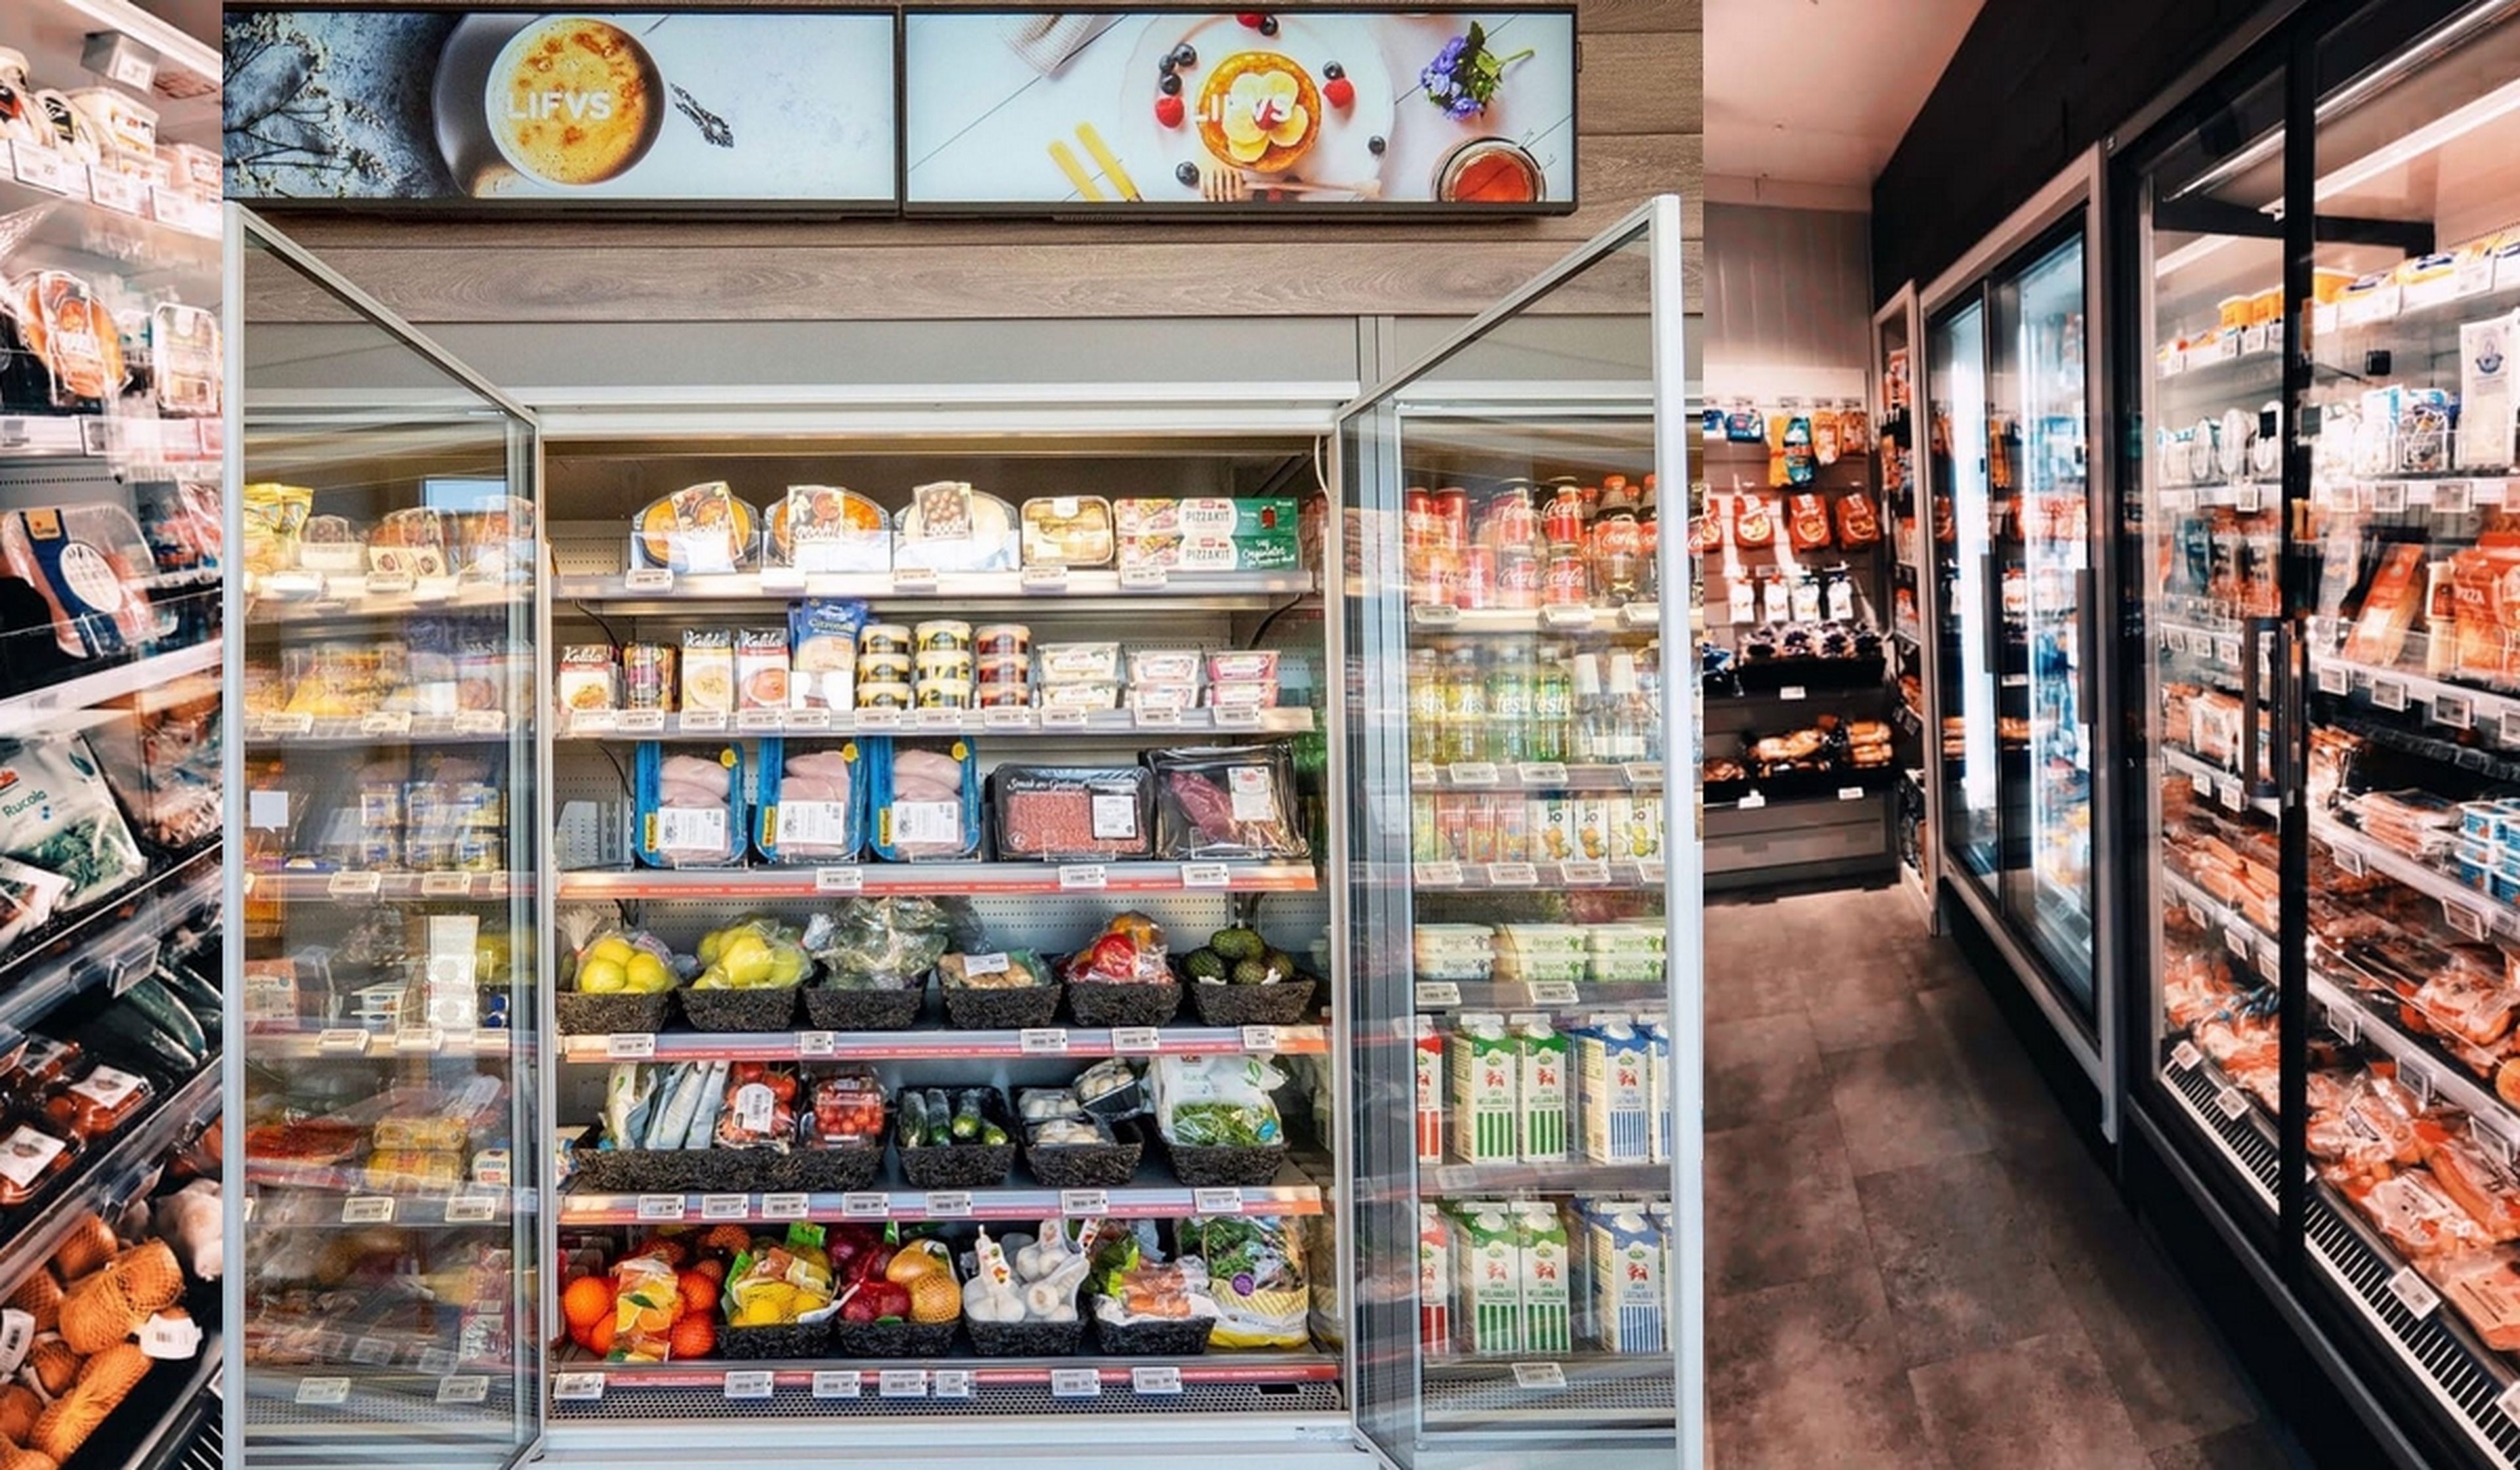 Village shops in mobile containers are opening in Sweden, without dependents or cashiers... the future of rural commerce?